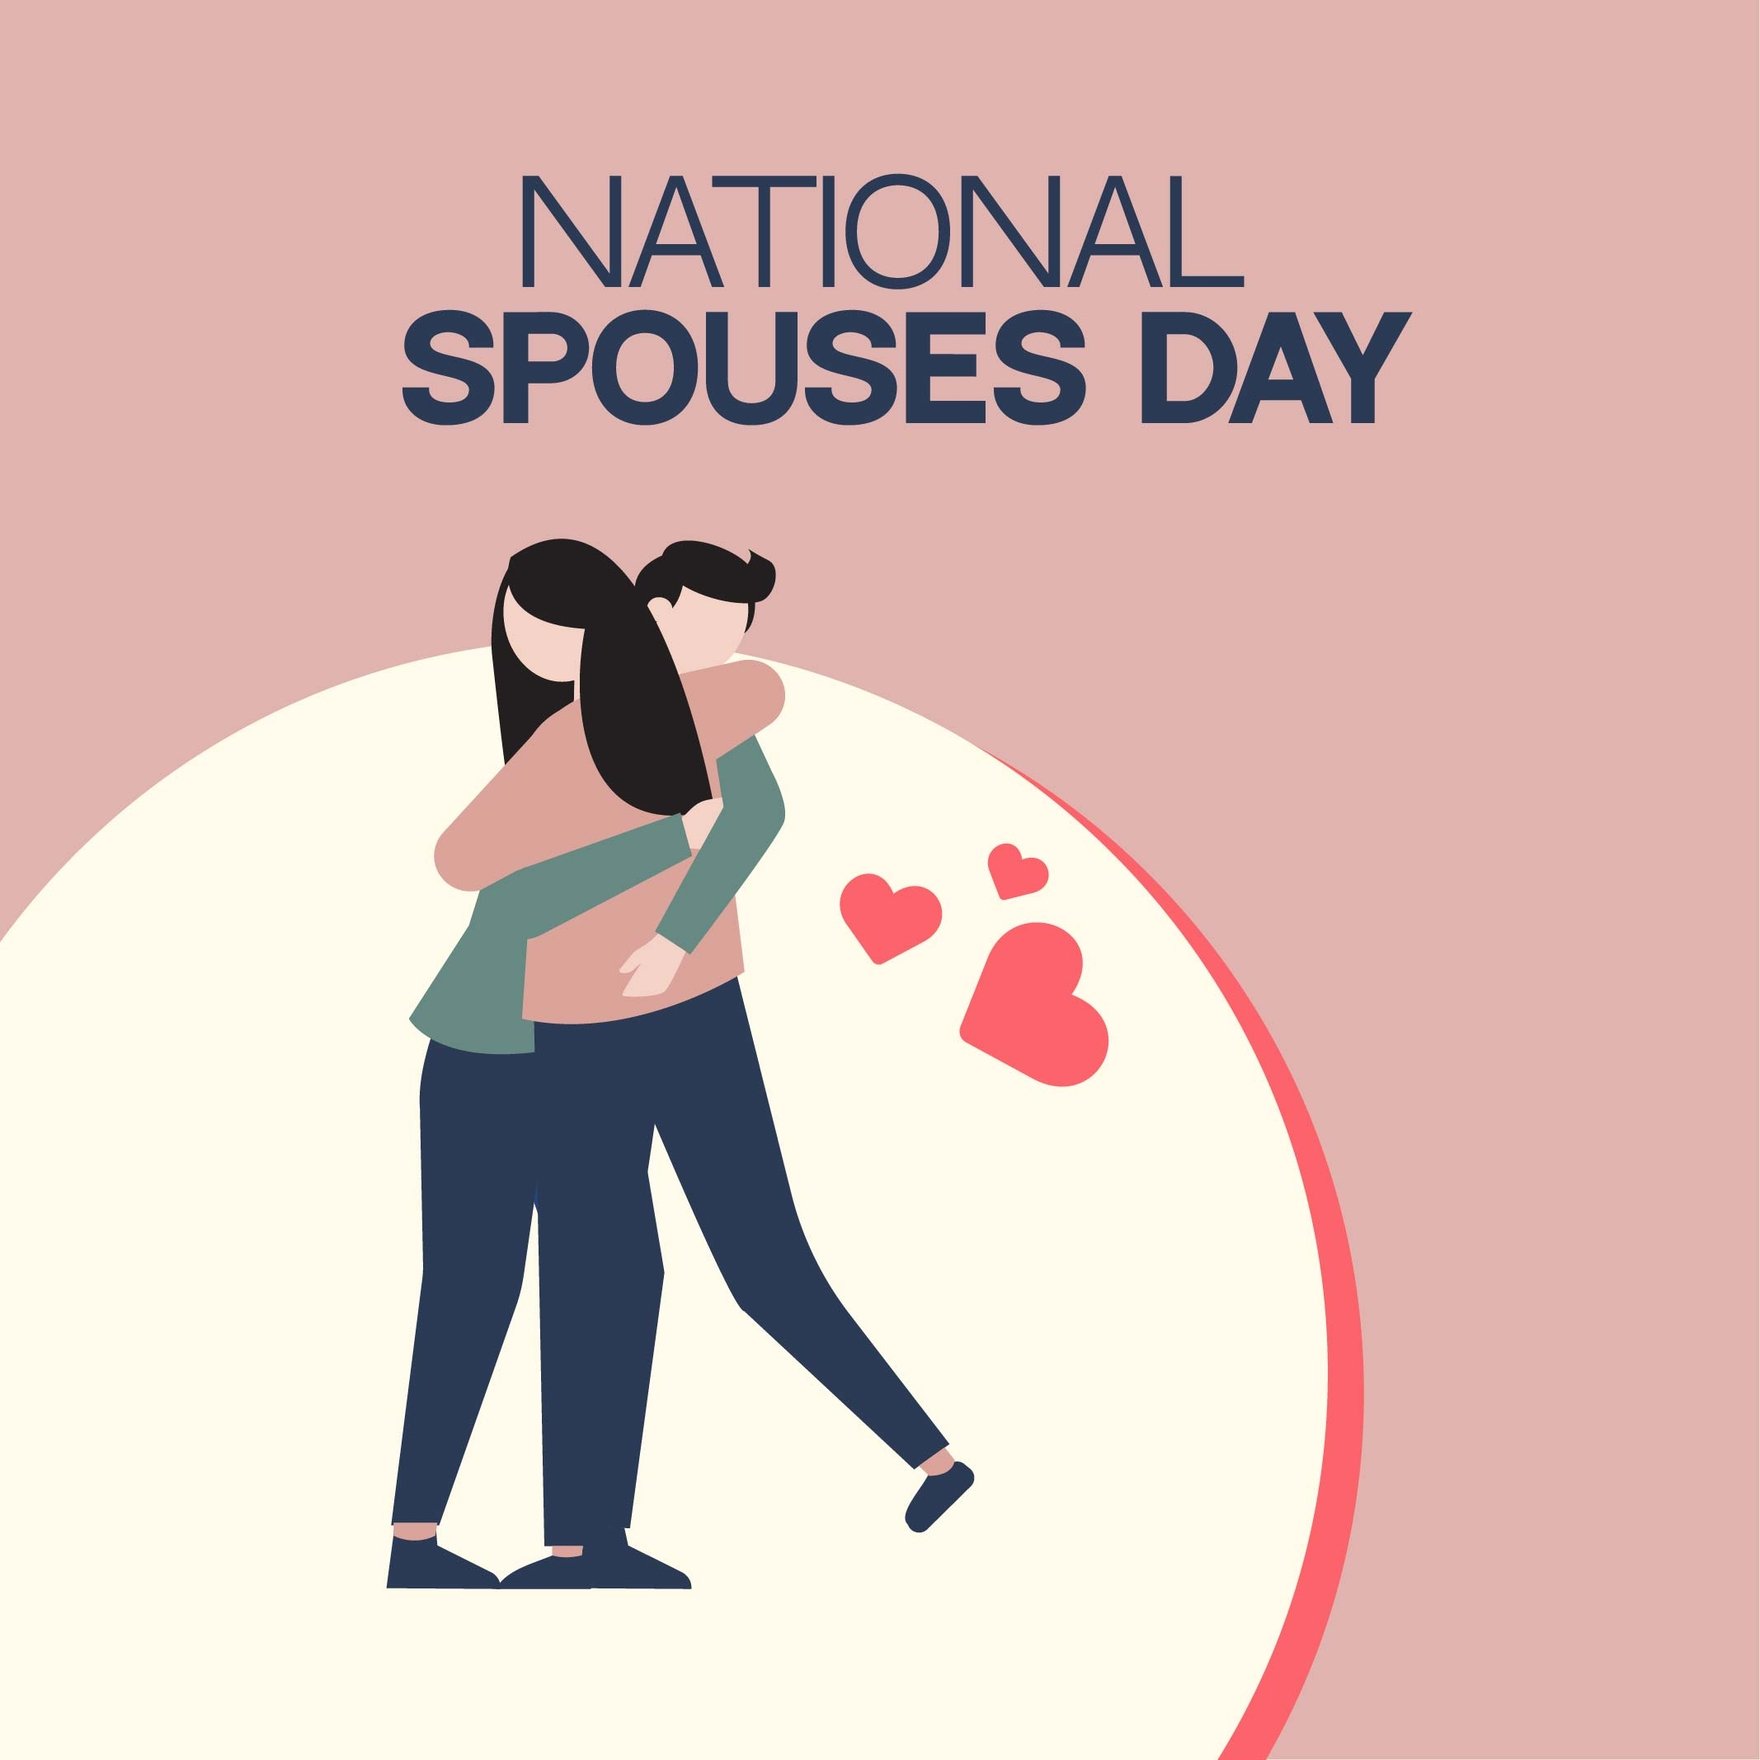 National Spouses Day Cartoon Vector in Illustrator, PSD, EPS, SVG, JPG, PNG